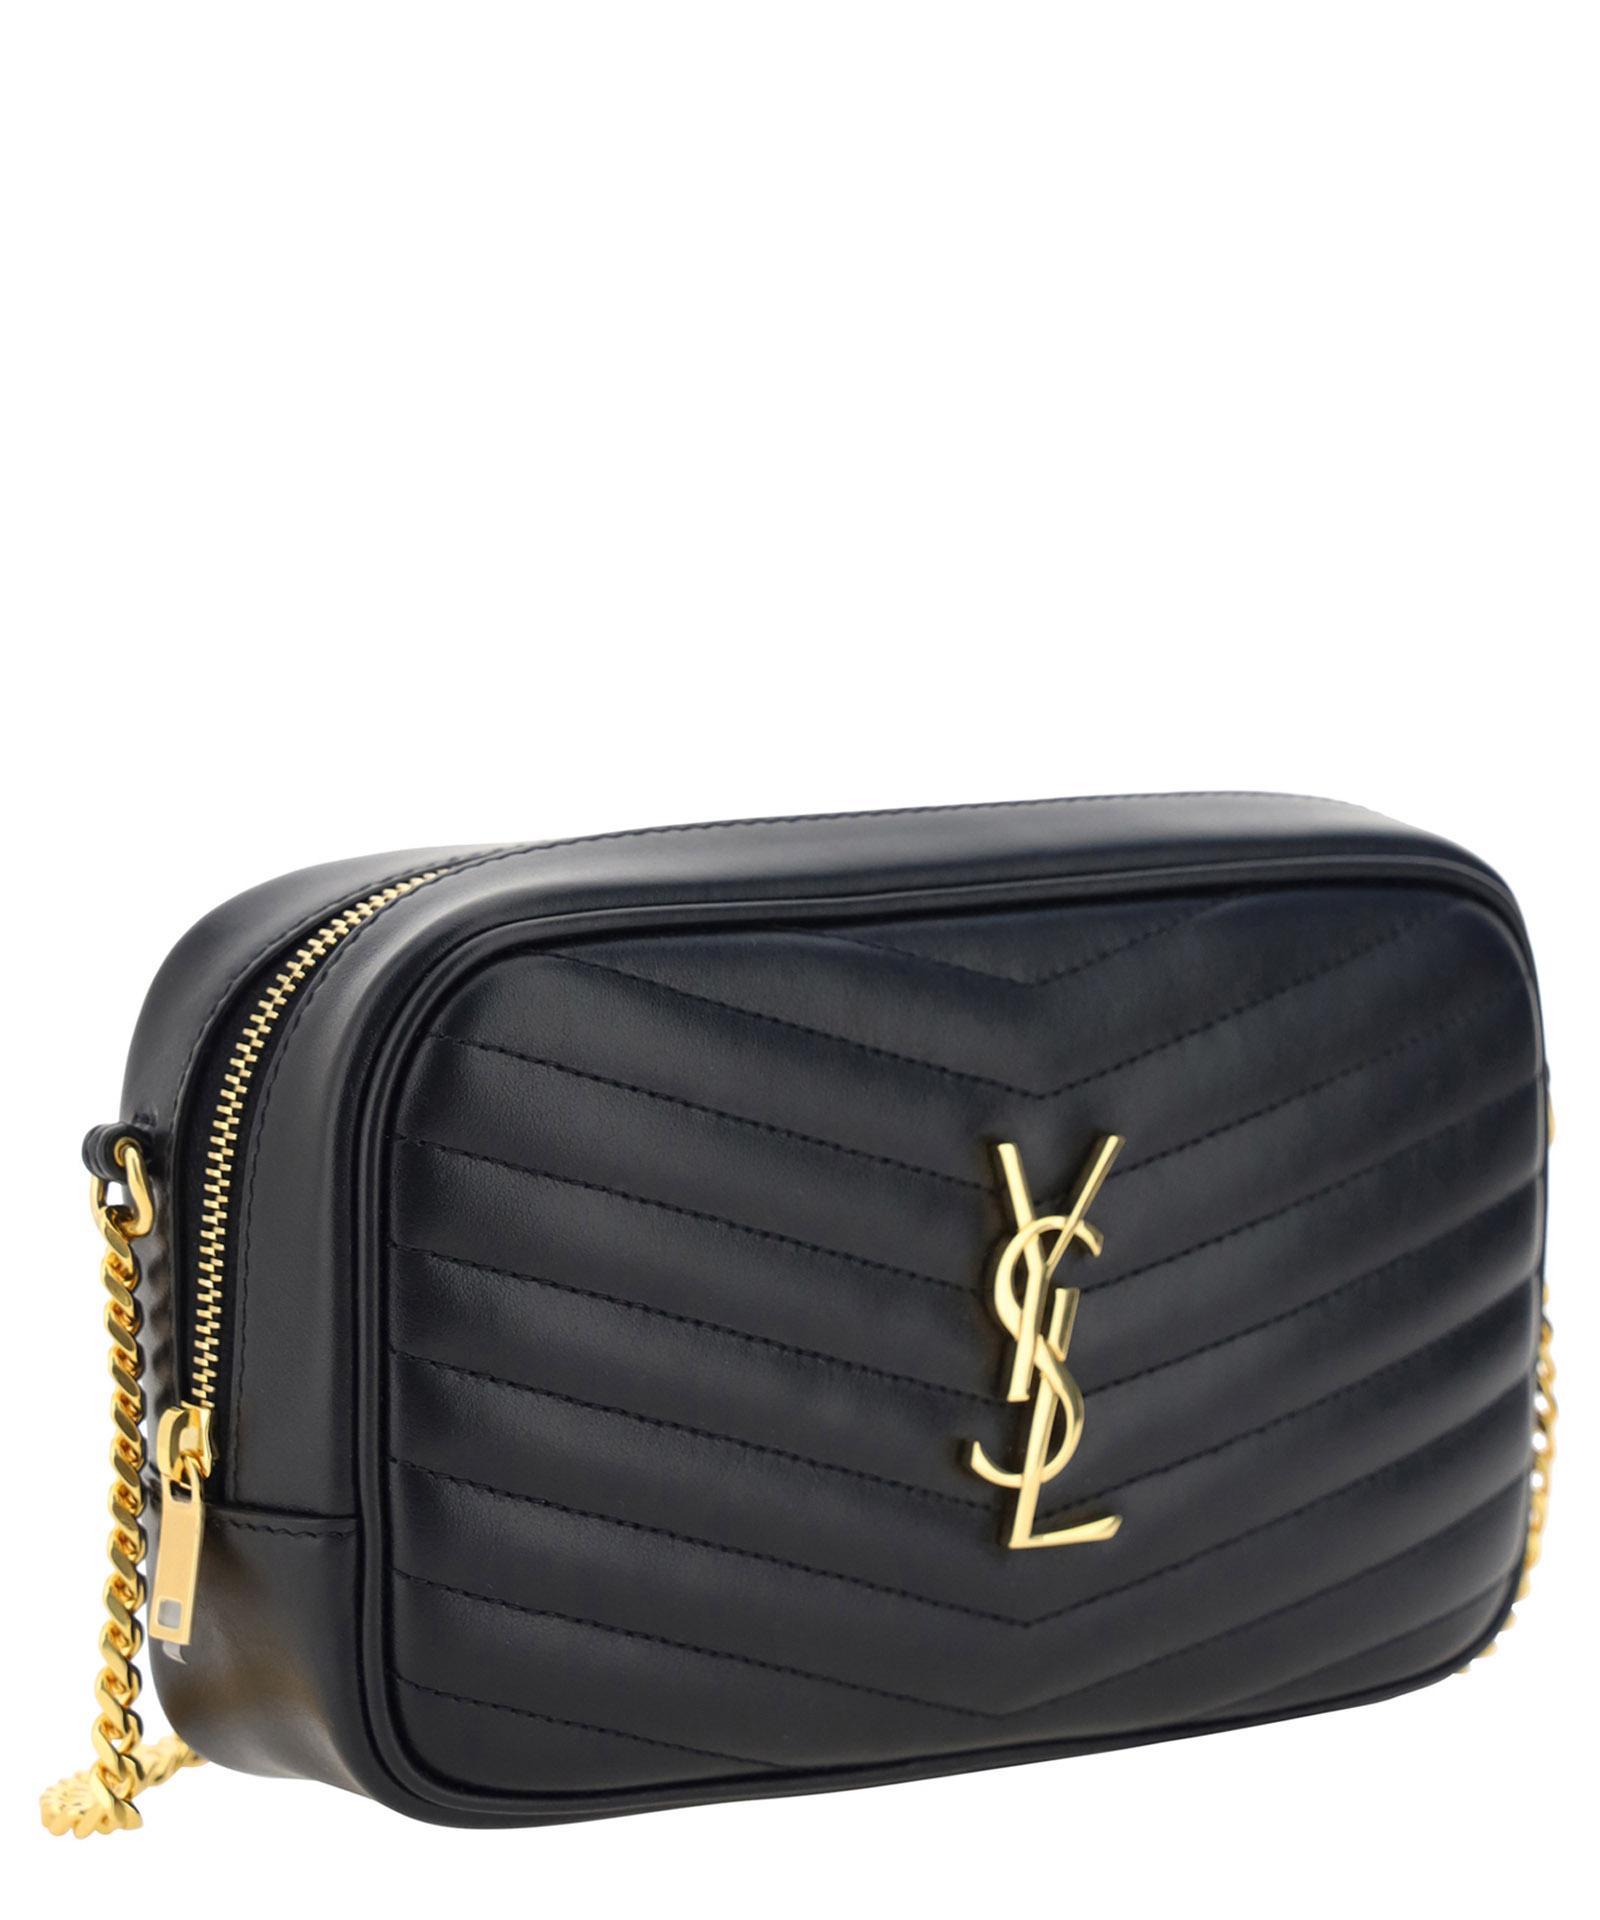 YSL Mini Lou Gray Camera Bag Gold Hardware. Made in Italy. With